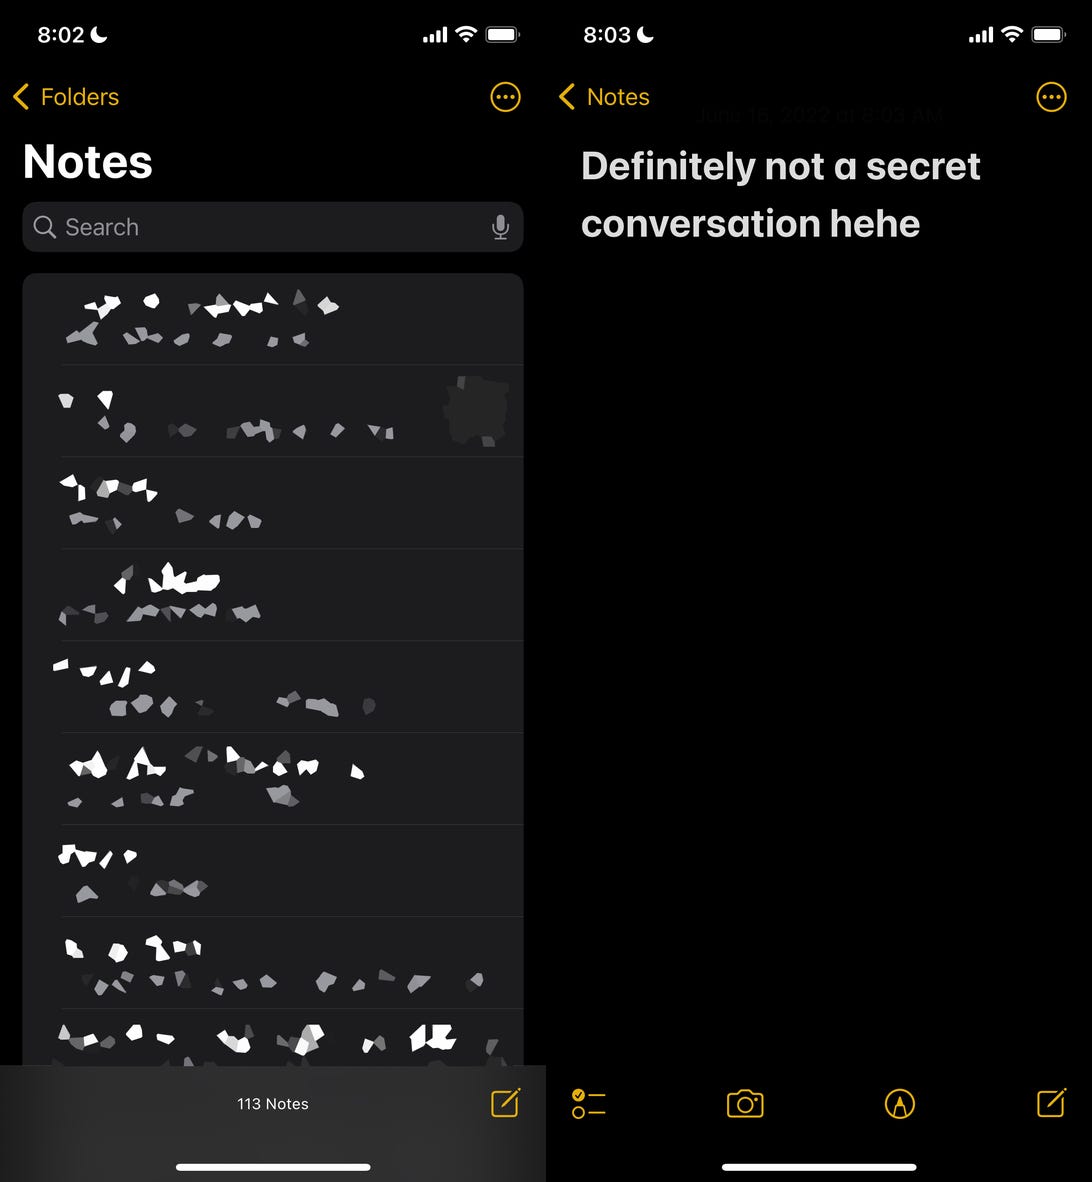 You Can Have Hidden Conversations on iOS. Here's How.
                        Having Hidden Conversations in iOS is Easier Than You Think.